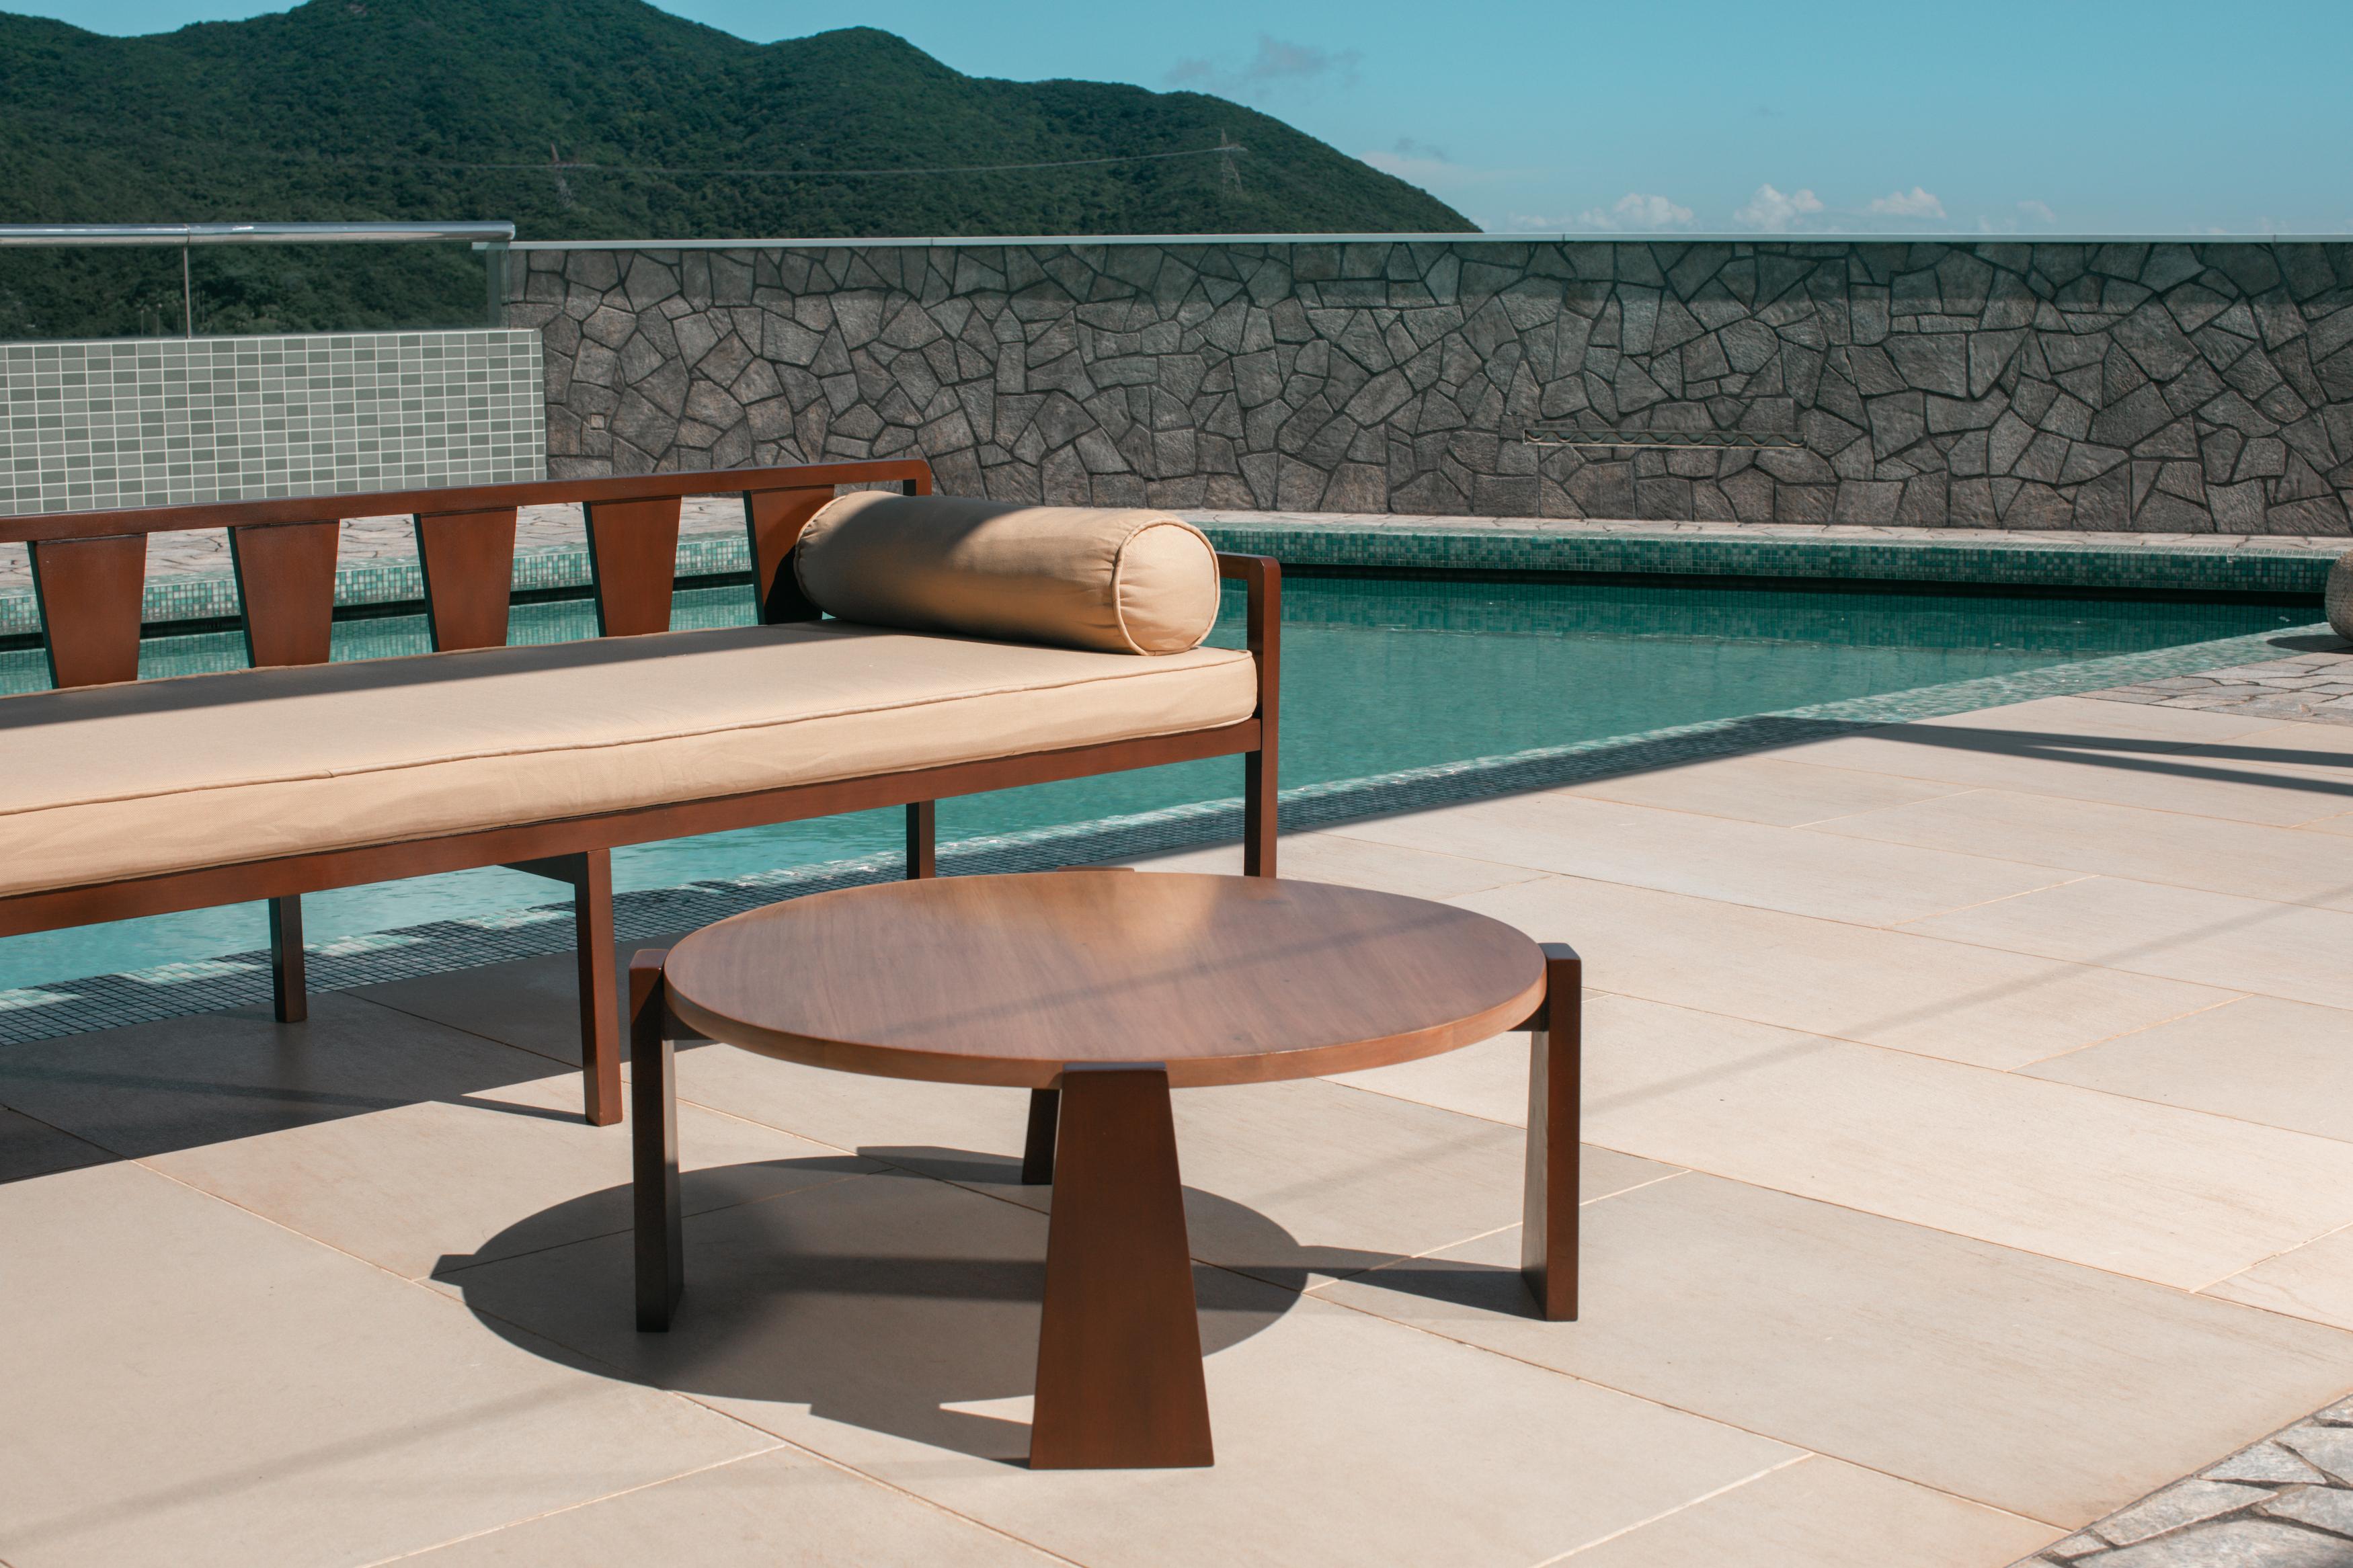 Featuring two tones of locally sourced solid wood, our coffee table C-Table-04 contrasts and highlights the beauty of natural wood with a unique outdoor design perfect for serving drinks or food when entertaining outdoors.  The wood features a